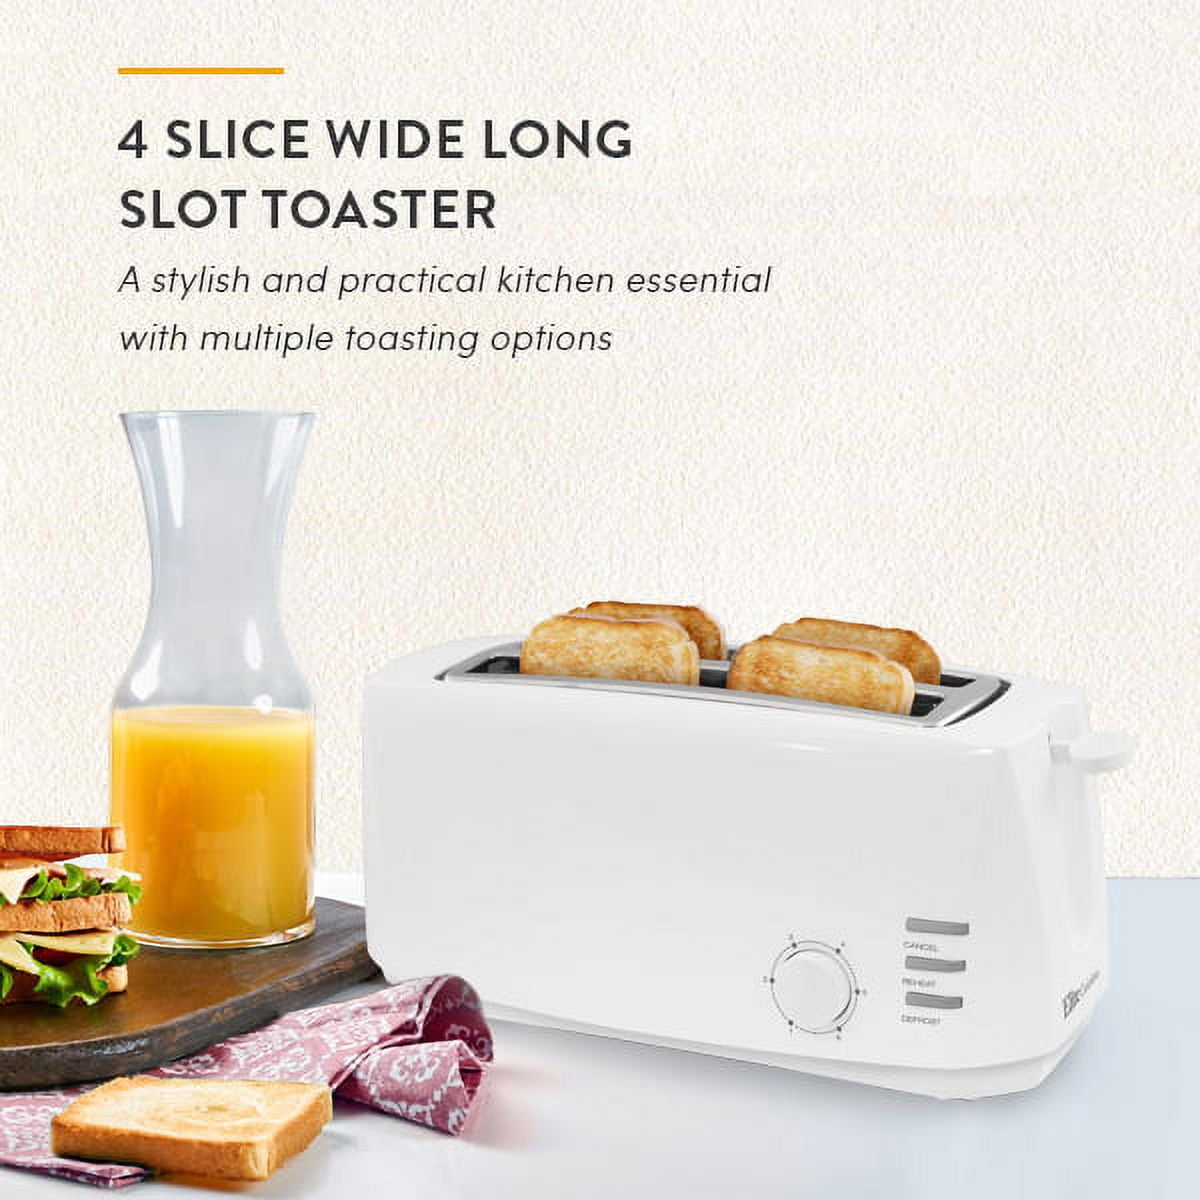 Elite Gourmet ECT118B Cool Touch Single Slice Toaster, 6 Toasting Levels &  Wide Slot for Bagels, Waffles, Specialty Breads, Pastry, Snacks, Black